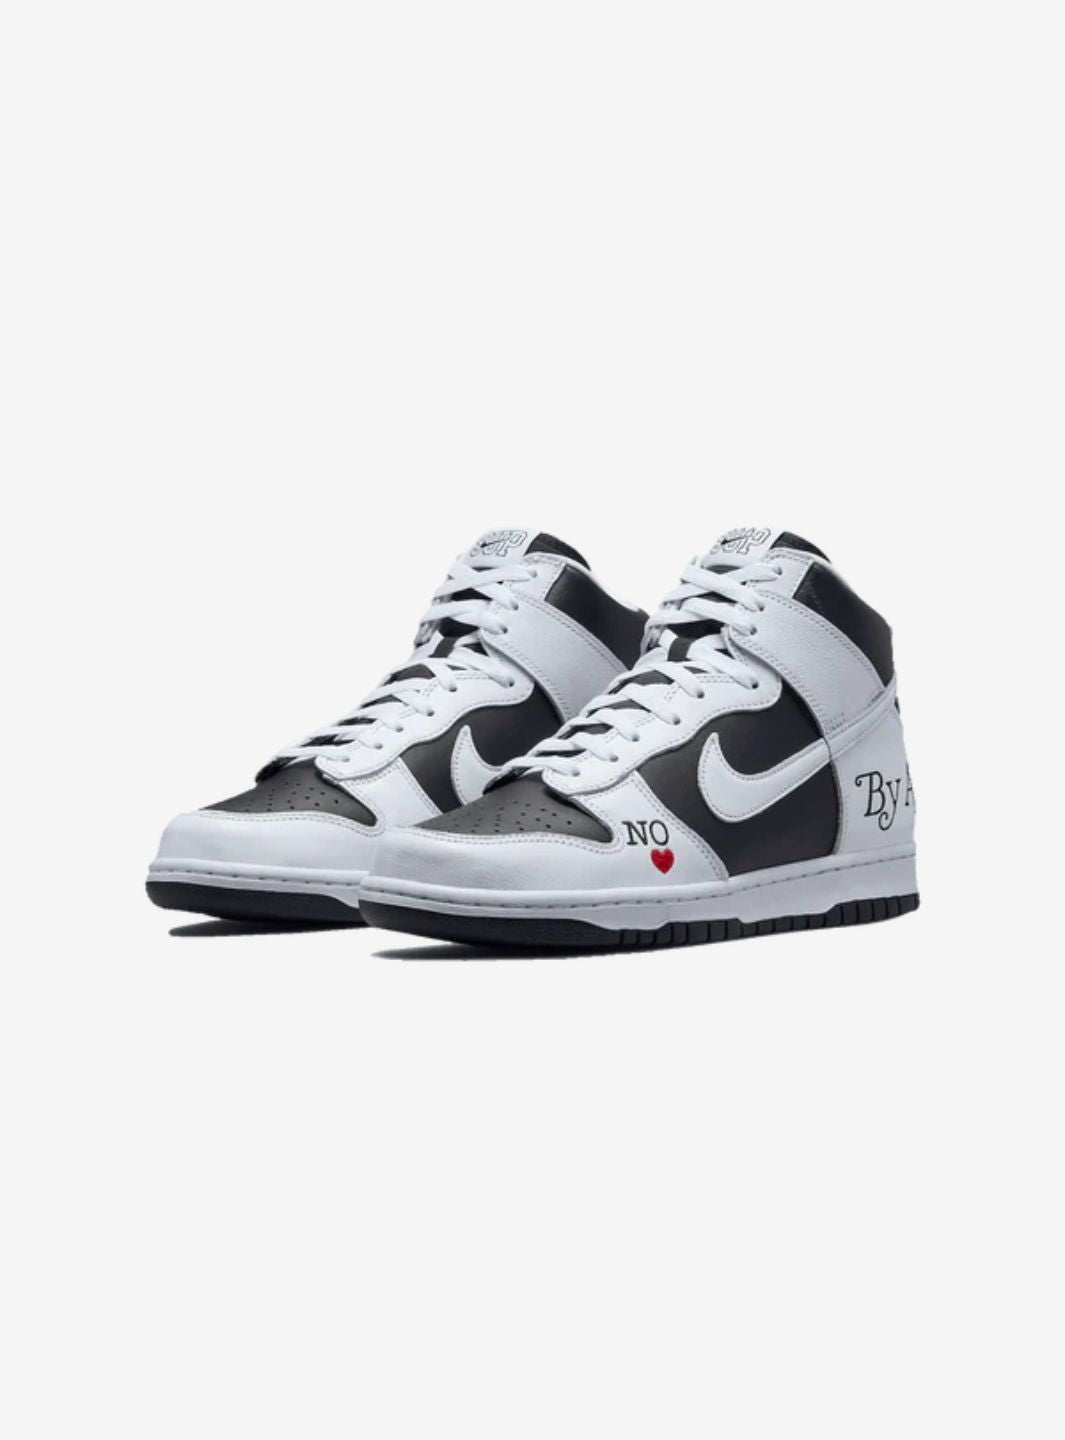 Nike SB Dunk High Supreme By Any Means Black - DN3741-002 | ResellZone